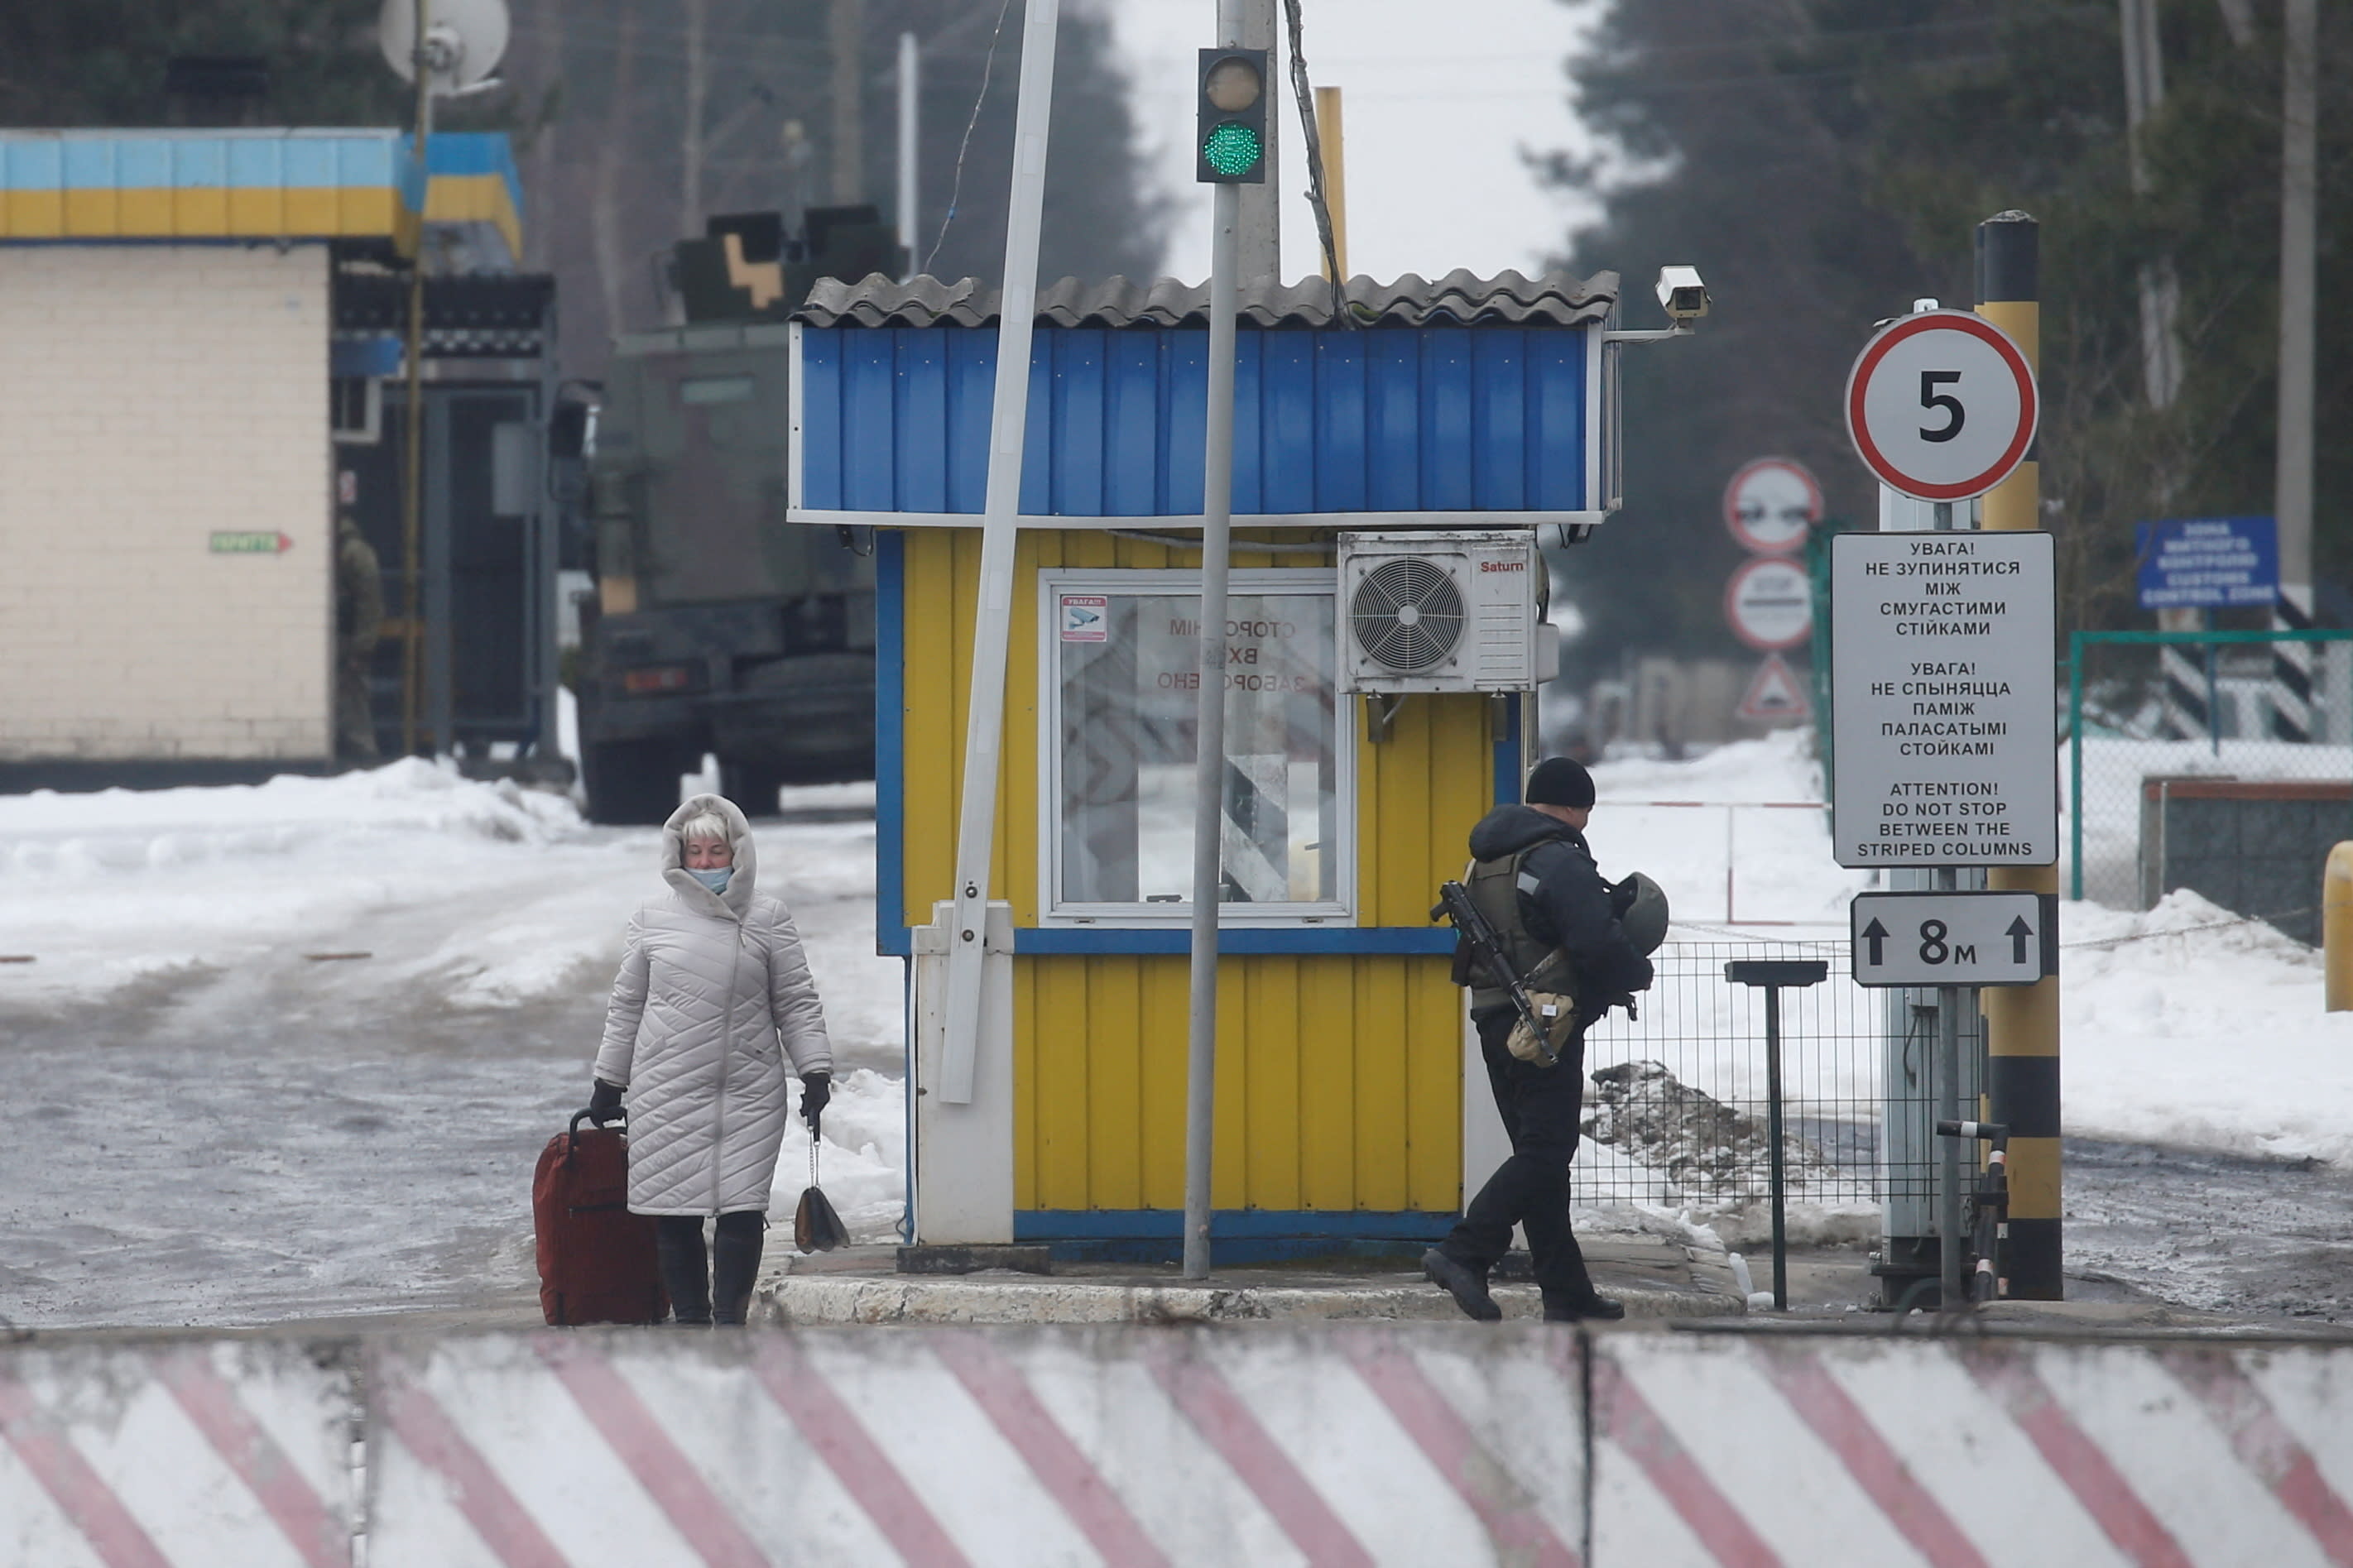 A view shows the Senkivka checkpoint near the border with Belarus and Russia in the Chernihiv region, Ukraine on Feb 16, 2022.